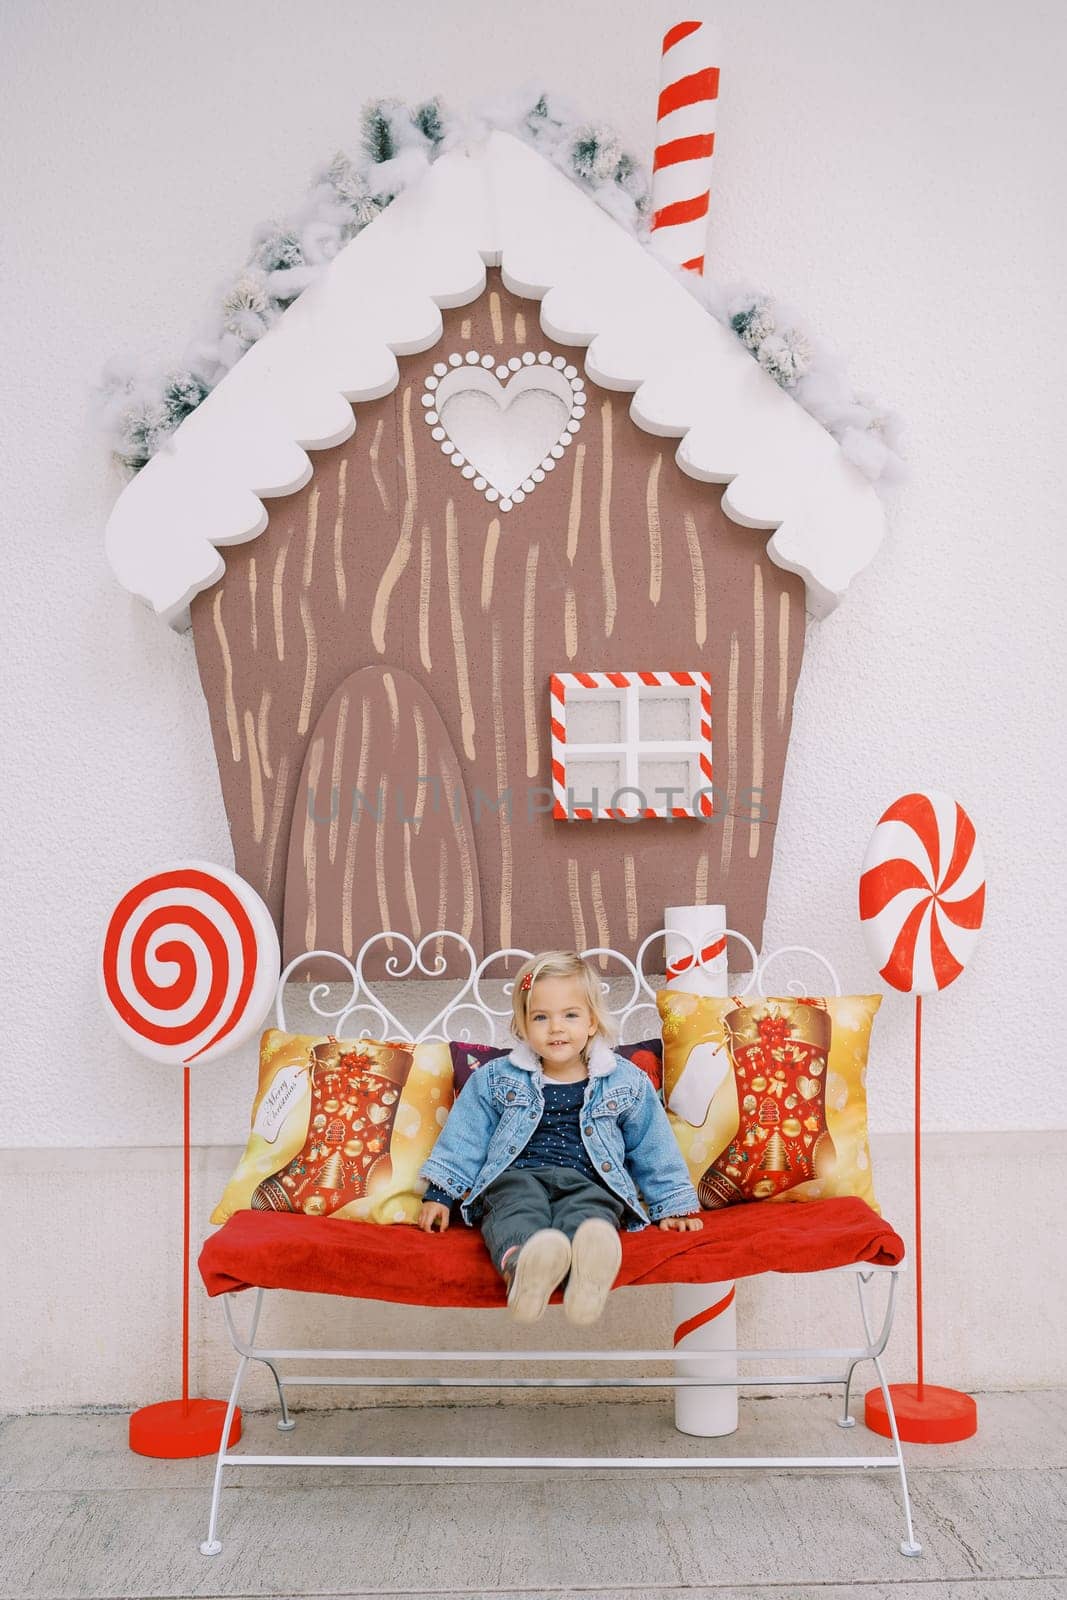 Little girl sits on a sofa in the middle of a Christmas composition by Nadtochiy